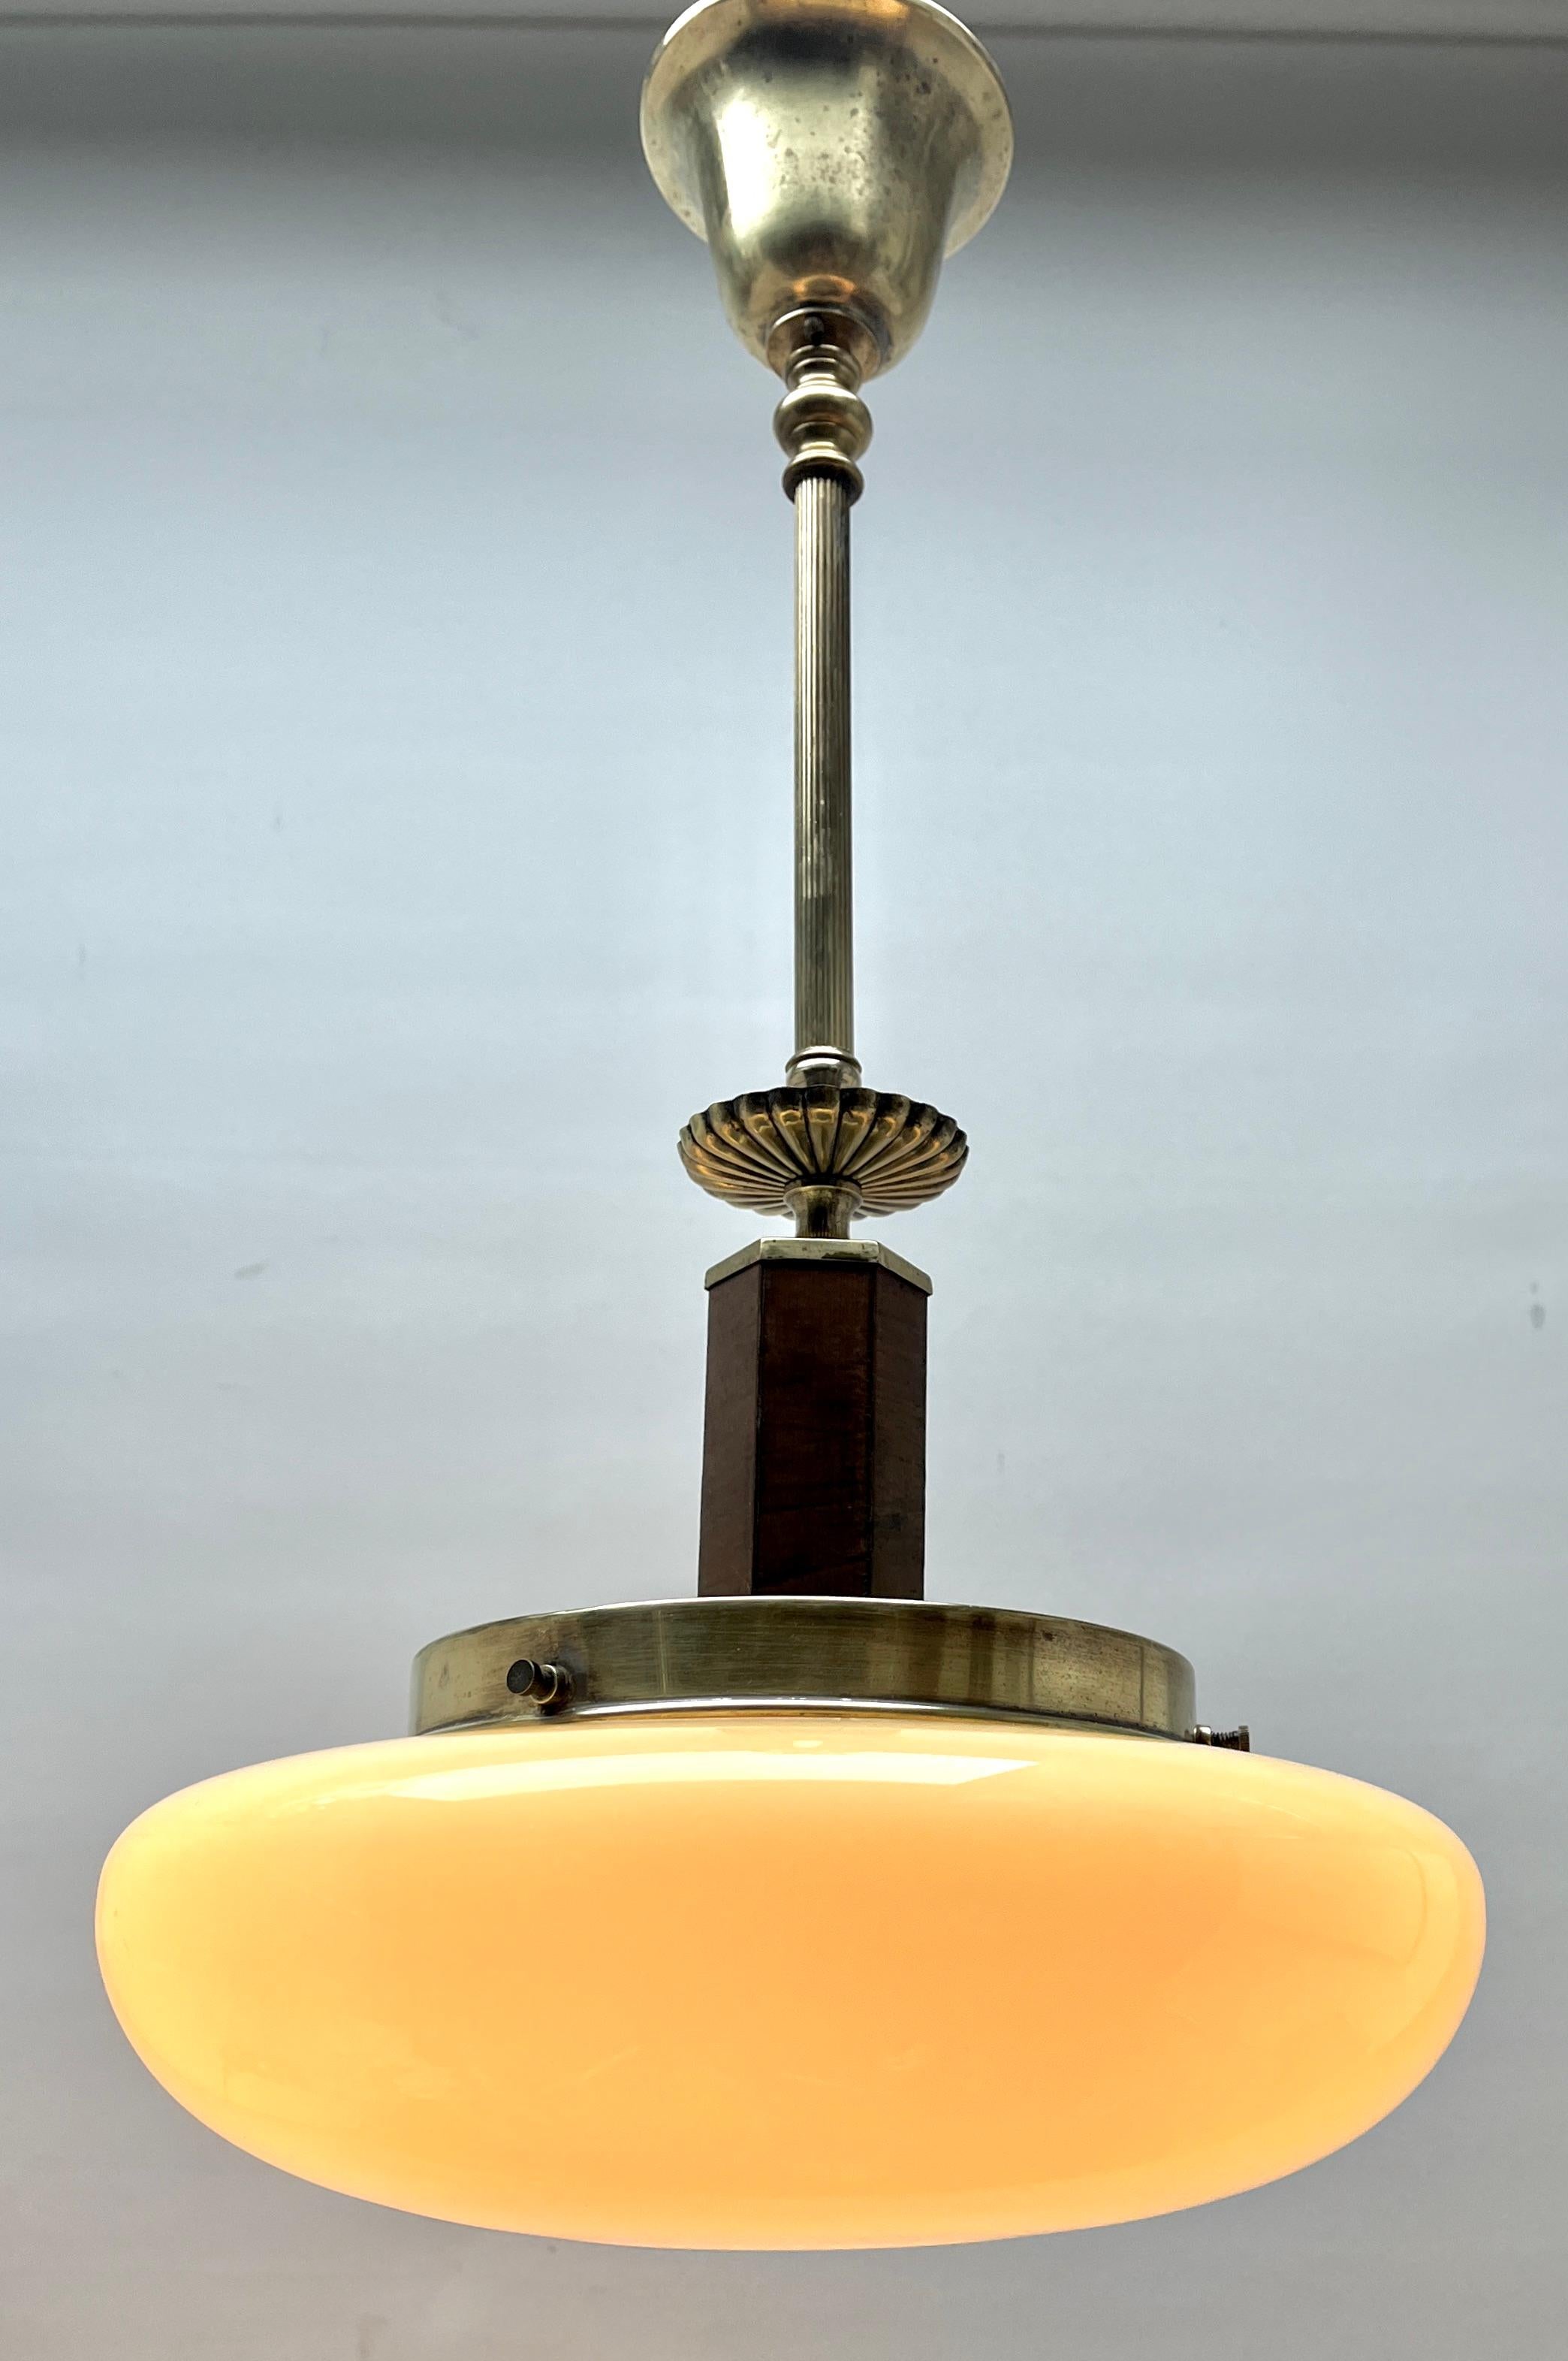 Hand-Crafted Art Deco Ceiling Lamp, Scailmont Belgium Glass Shade, 1930s